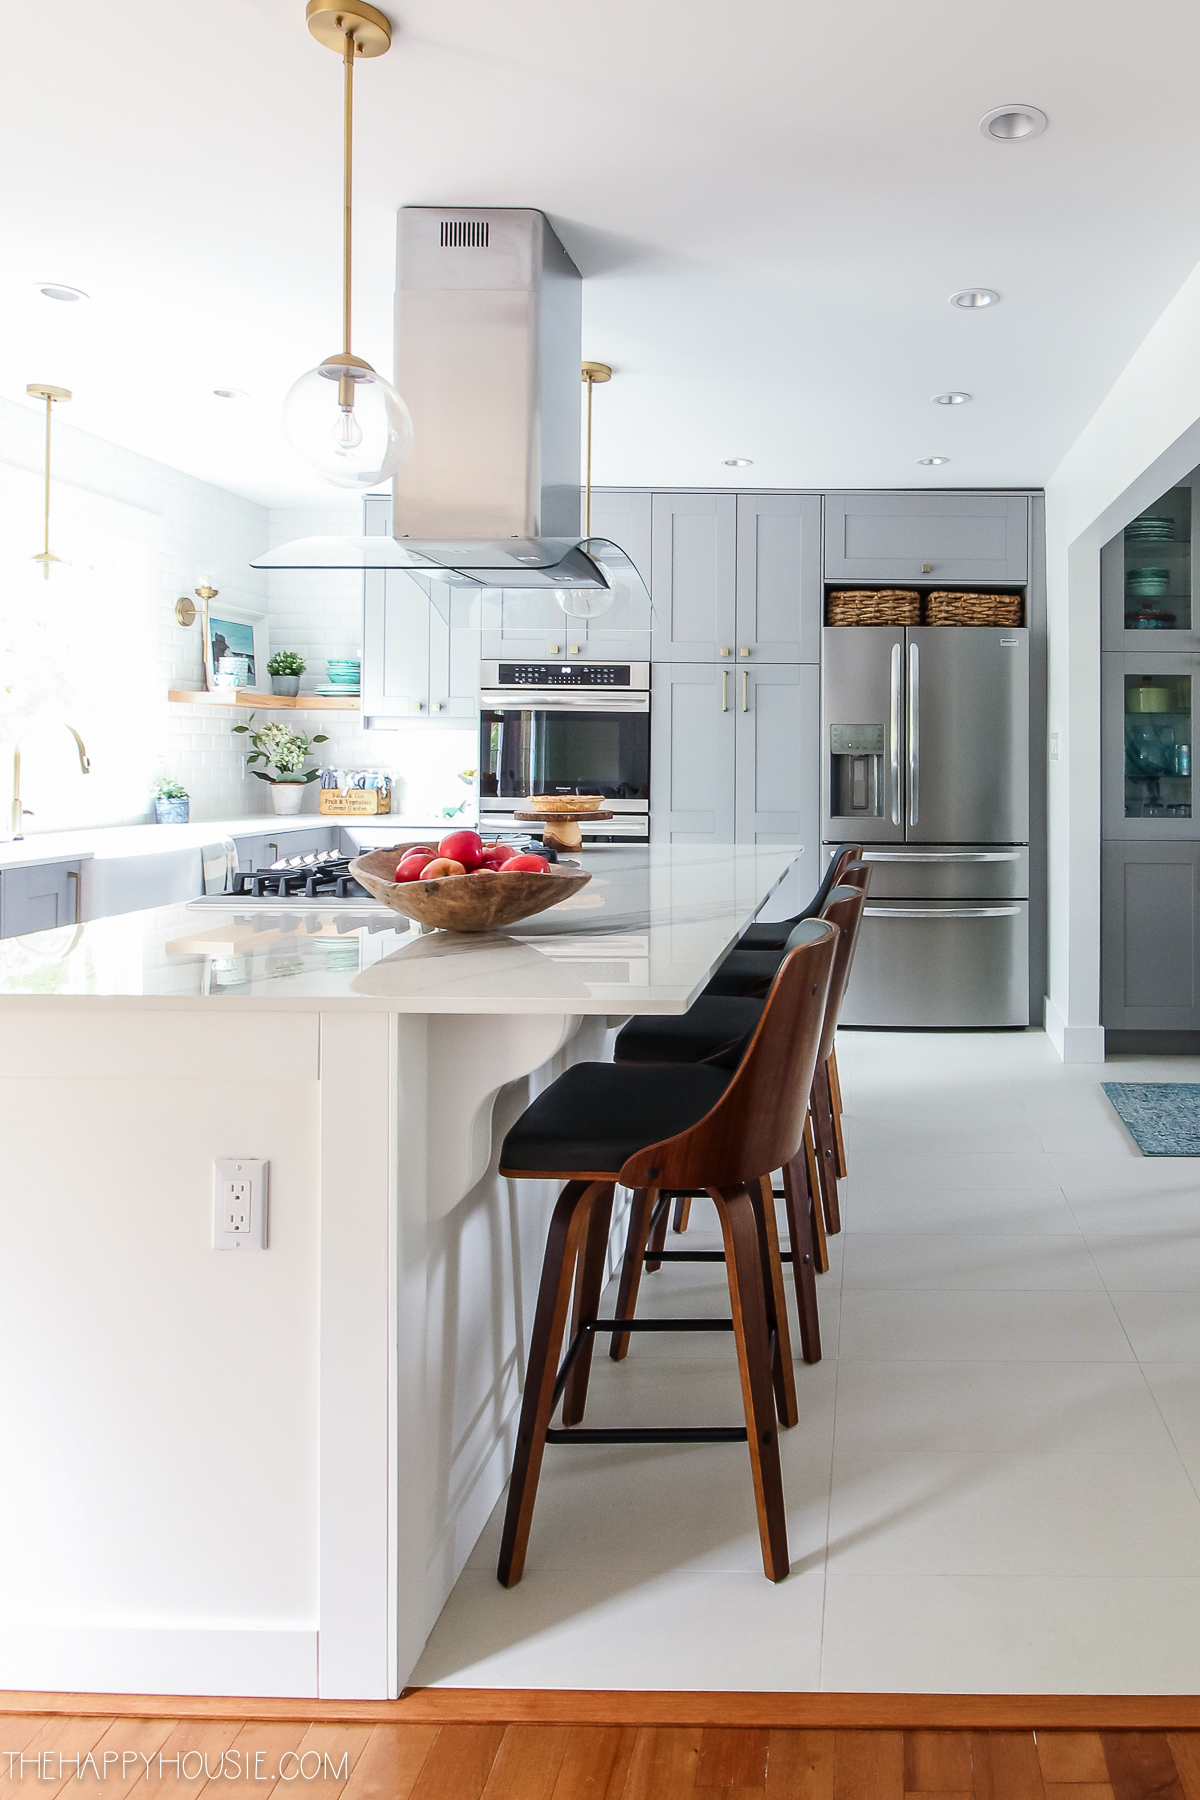 A white kitchen island with a light above it is in the newly renovated kitchen.